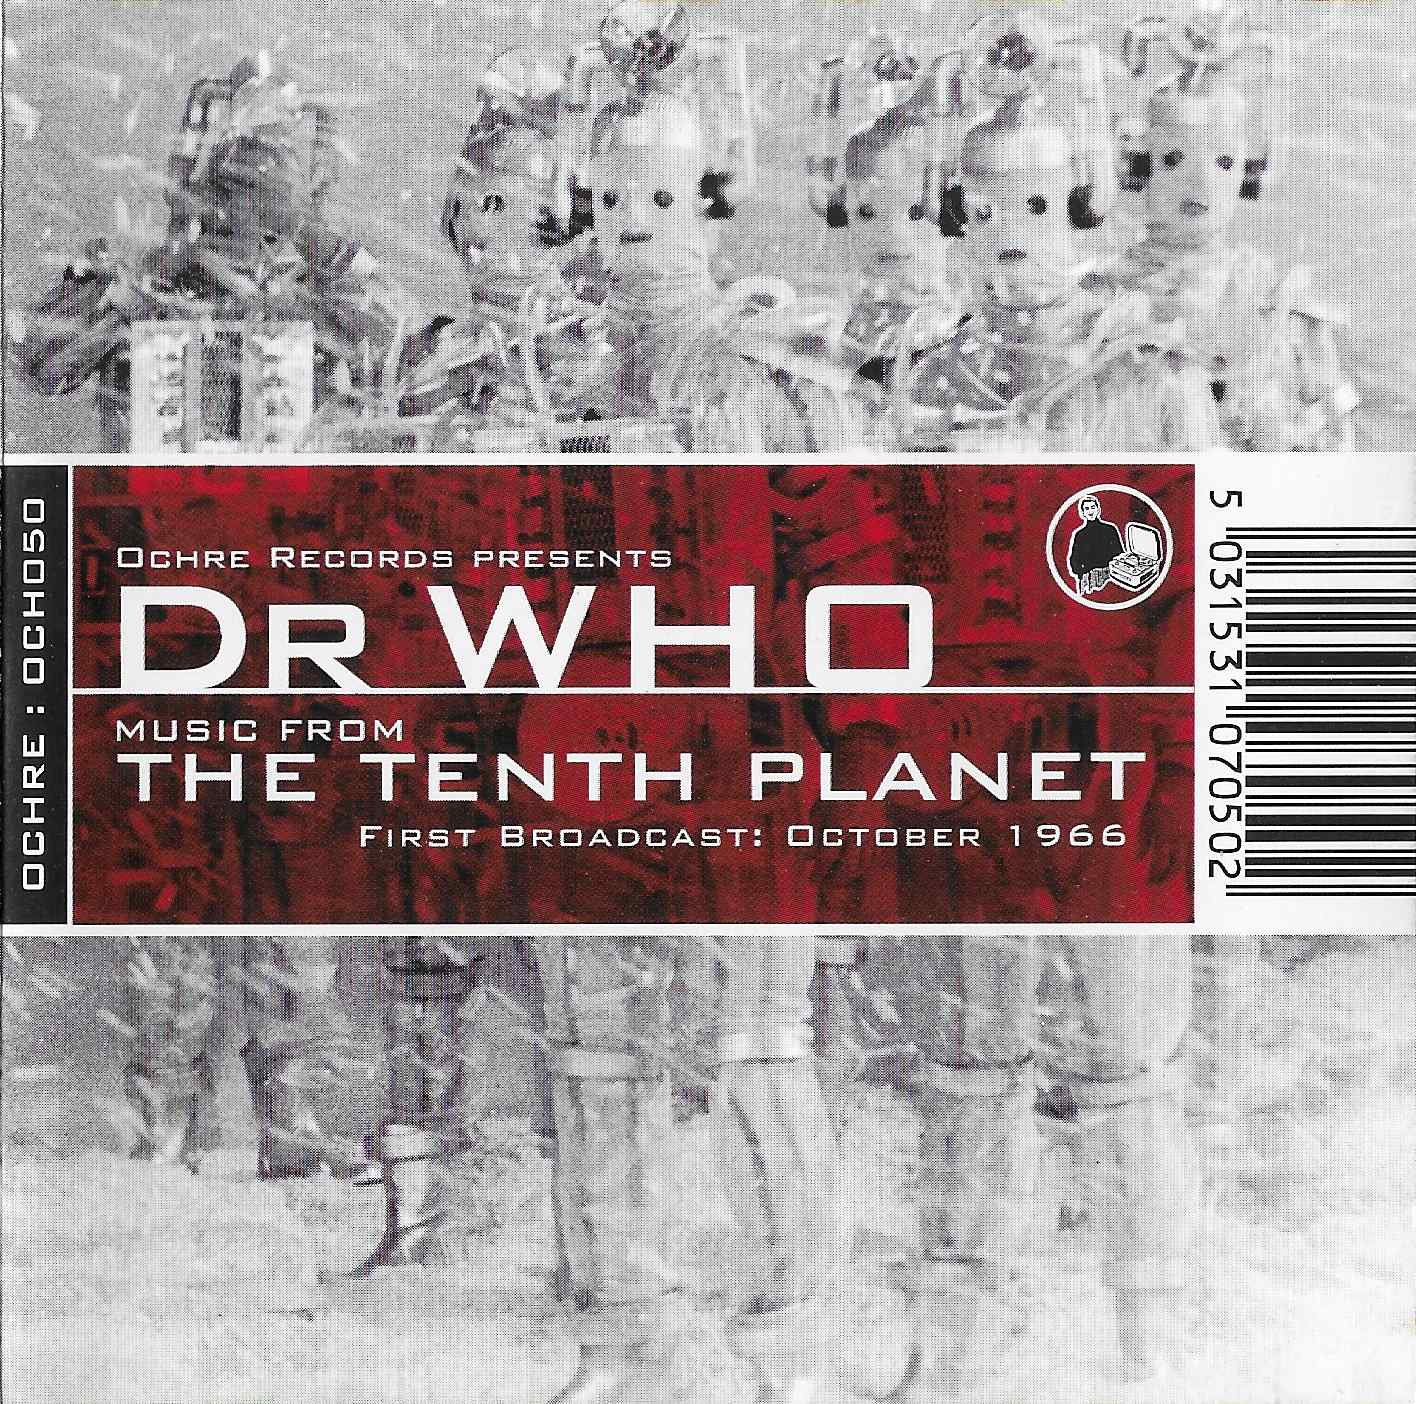 Picture of OCH 050 Doctor Who - Music from The Tenth Planet by artist Roger Roger / Walter Stott / Douglas Gamley / Martin Slavin / Dennis Farnon from the BBC records and Tapes library